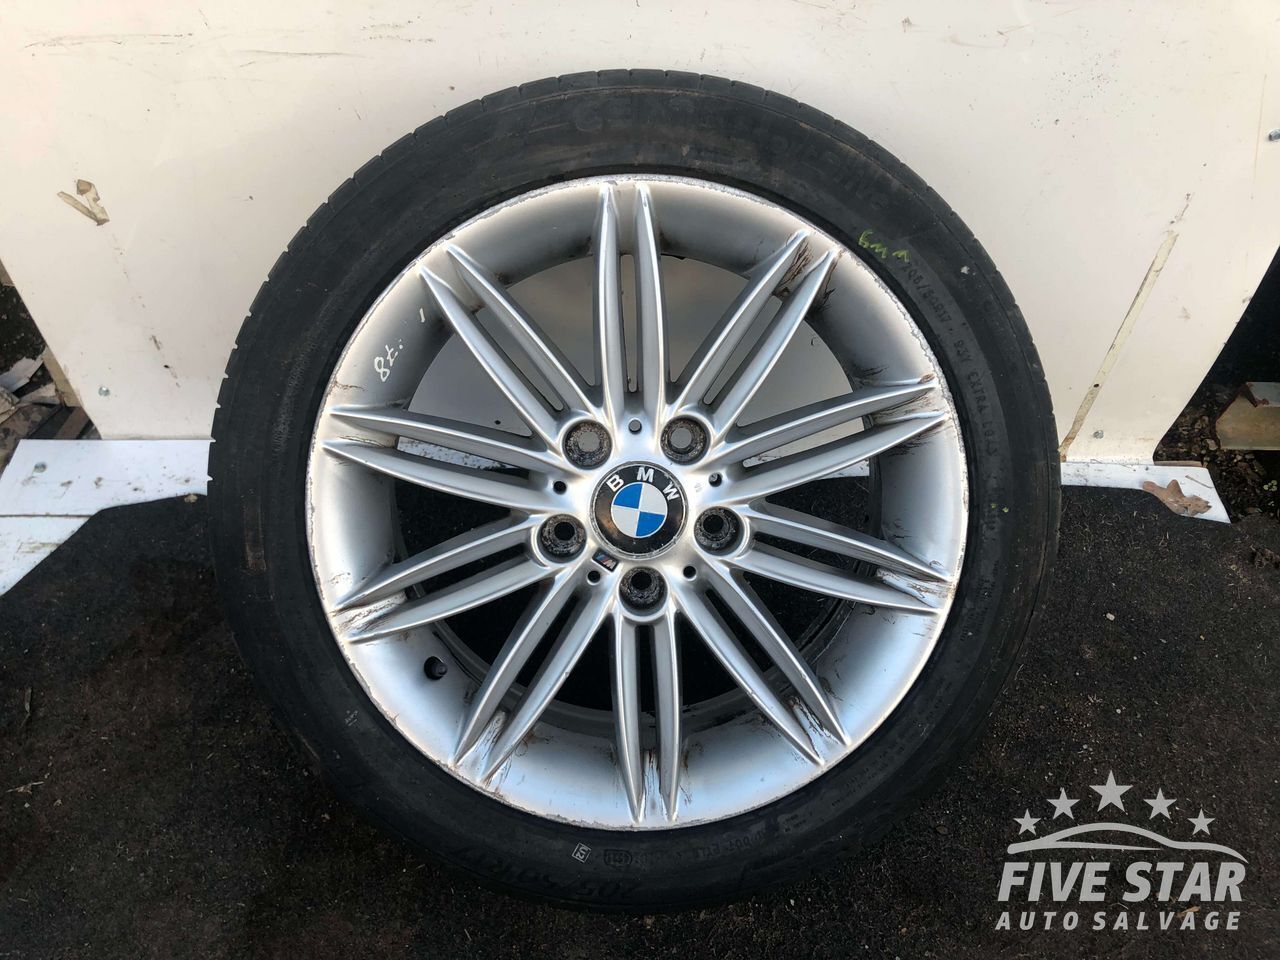 1999 BMW 3 Series 318i (97-01) Saloon 4/5dr R17 Alloy Wheel With Tire 8036937